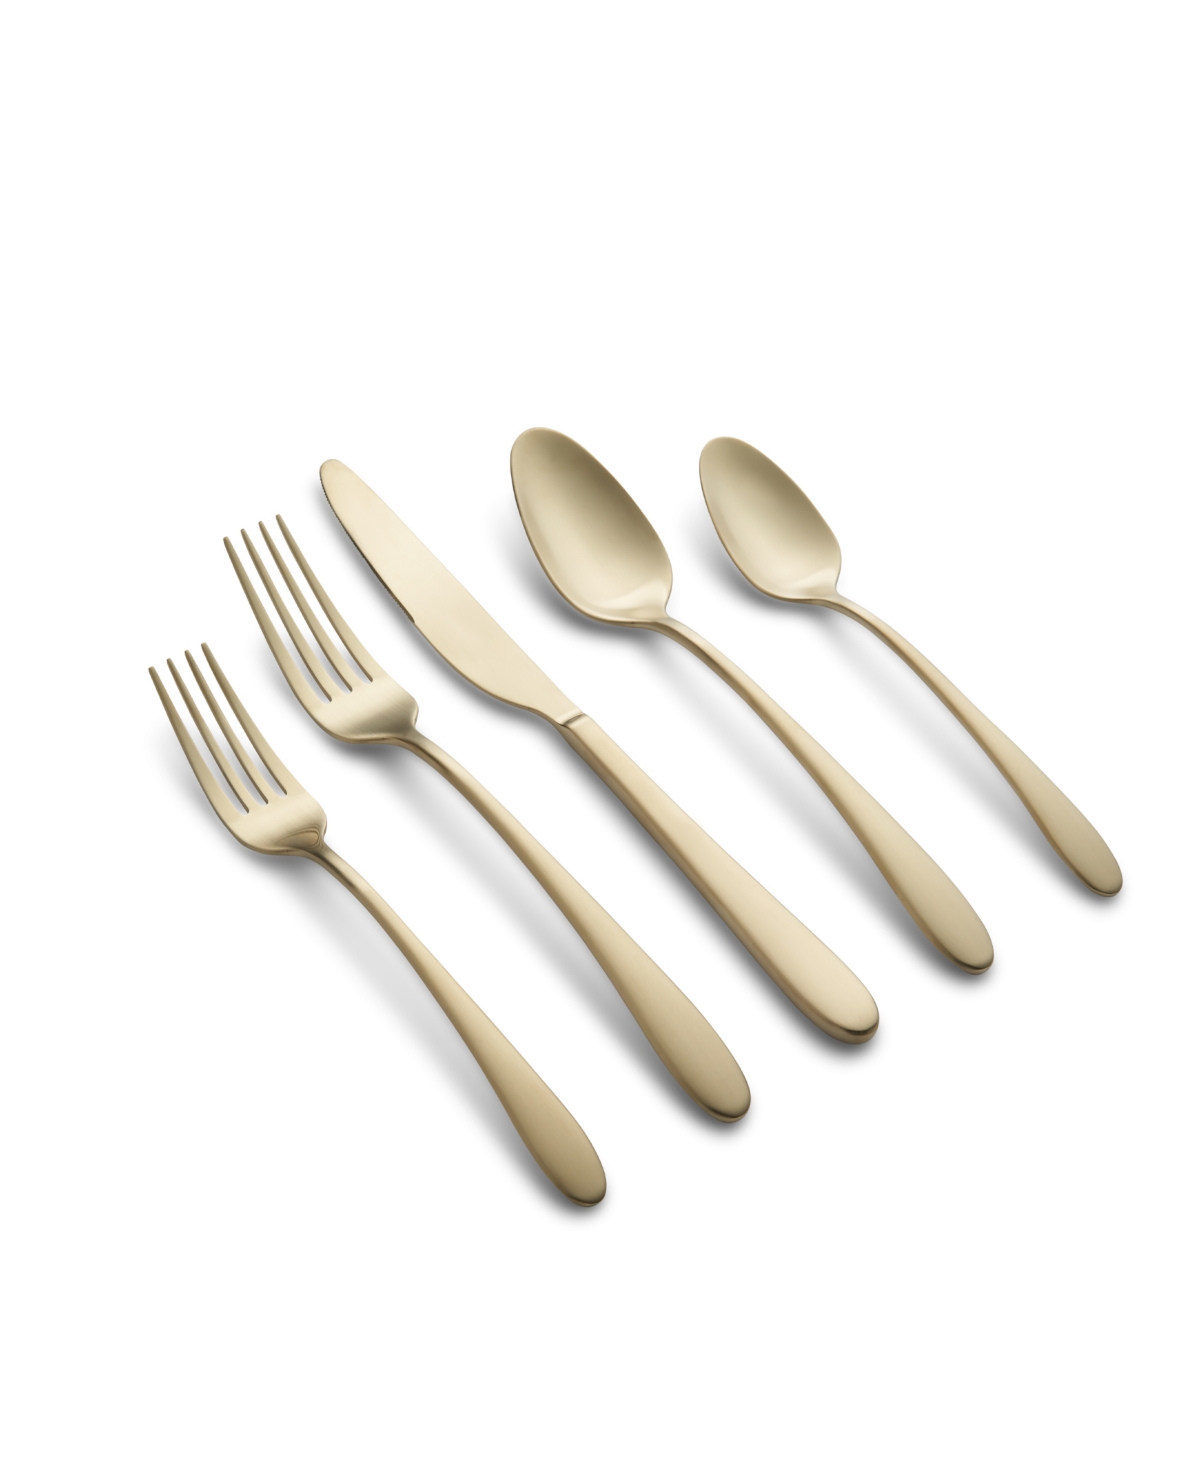 Cambridge Silversmiths Poet Champagne Satin 20 Piece 18/10 Stainless Steel Flatware Set, Service For 4 In Champagne Gold